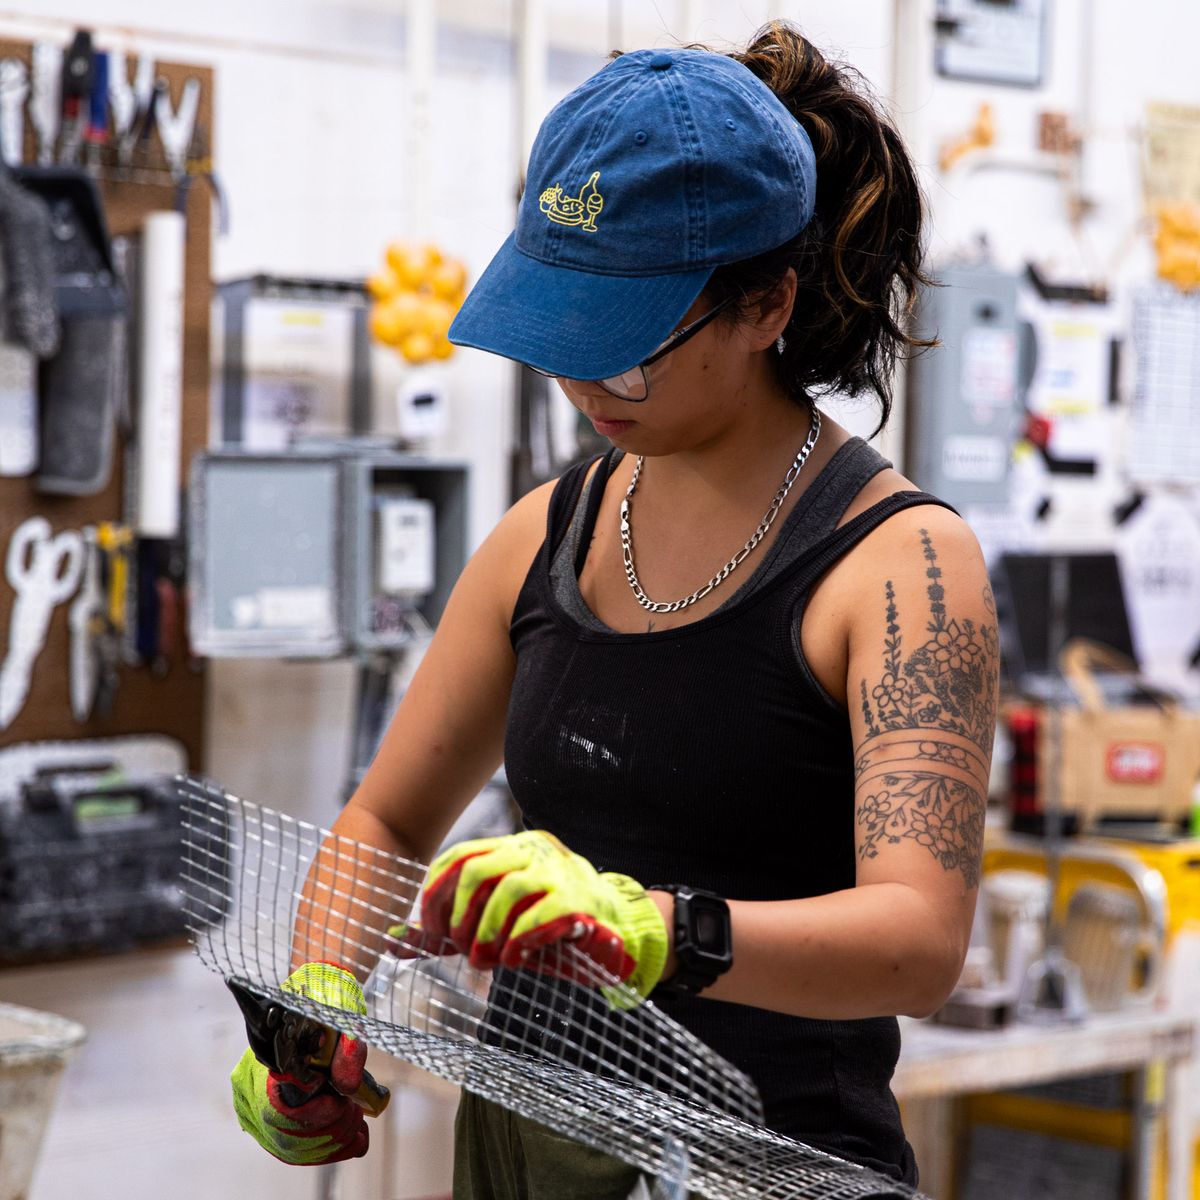 In a manufacturing setting, a person is wearing a classic blue baseball hat with yellow embroidery on the front depicting a feast of fish, fruit and wine.